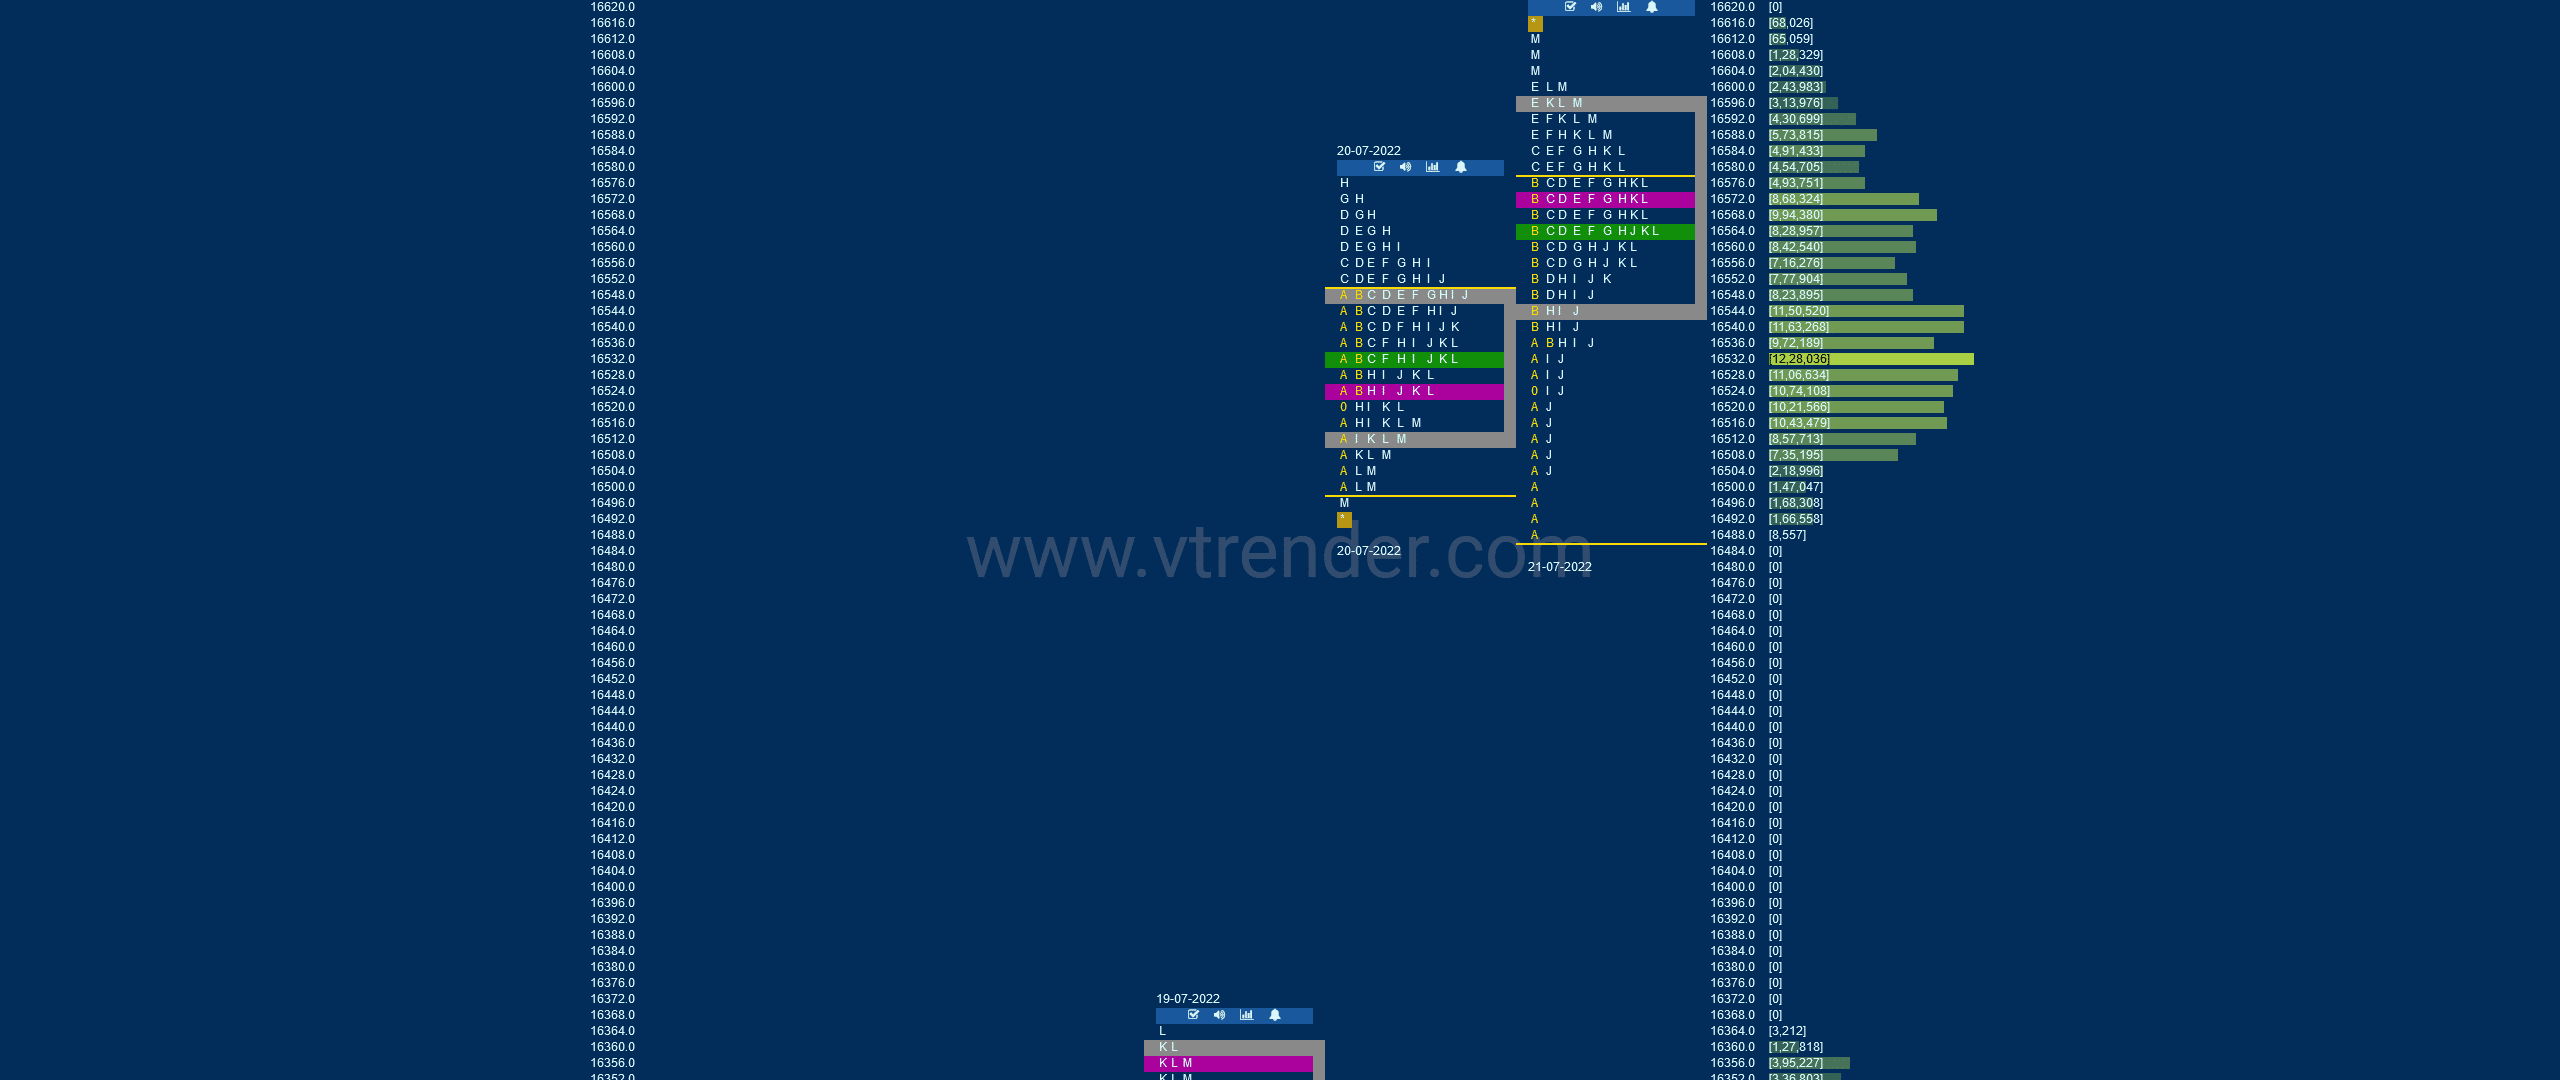 Nf 15 Market Profile Analysis Dated 21St Jul 2022 Banknifty Futures, Charts, Day Trading, Intraday Trading, Intraday Trading Strategies, Market Profile, Market Profile Trading Strategies, Nifty Futures, Order Flow Analysis, Support And Resistance, Technical Analysis, Trading Strategies, Volume Profile Trading